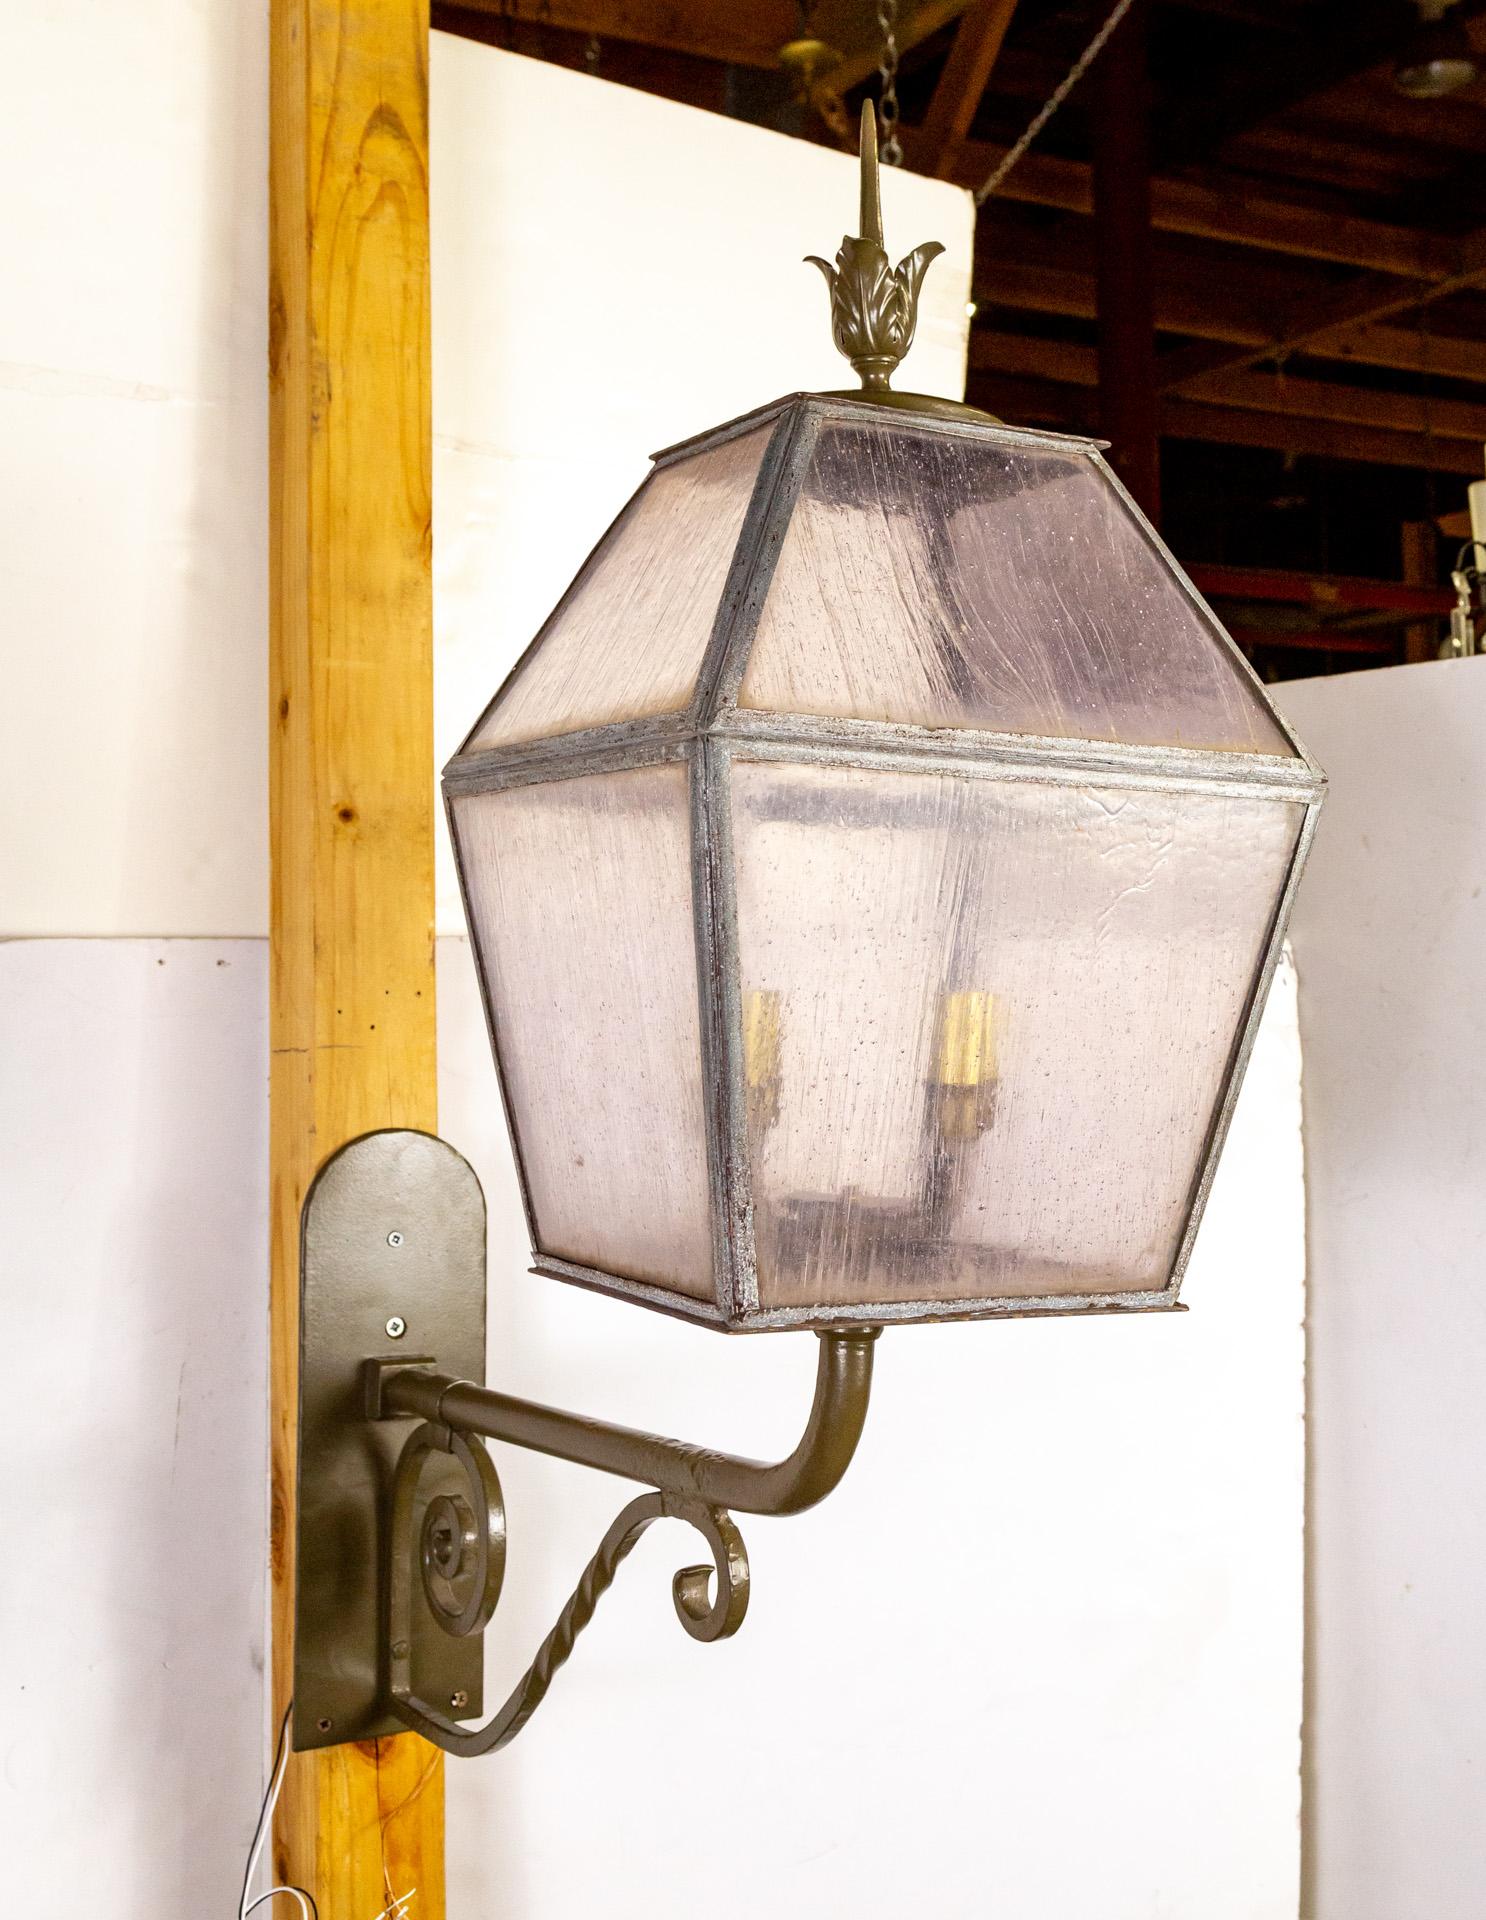 A sizable, 4-light, wall lantern from the early 20th century.  With a freshly powder-coated finial, scroll arm, and backplate.   Newly rewired with brass candle covers. The seeded glass windows are pale lavender.  It has a decorative brass bottom